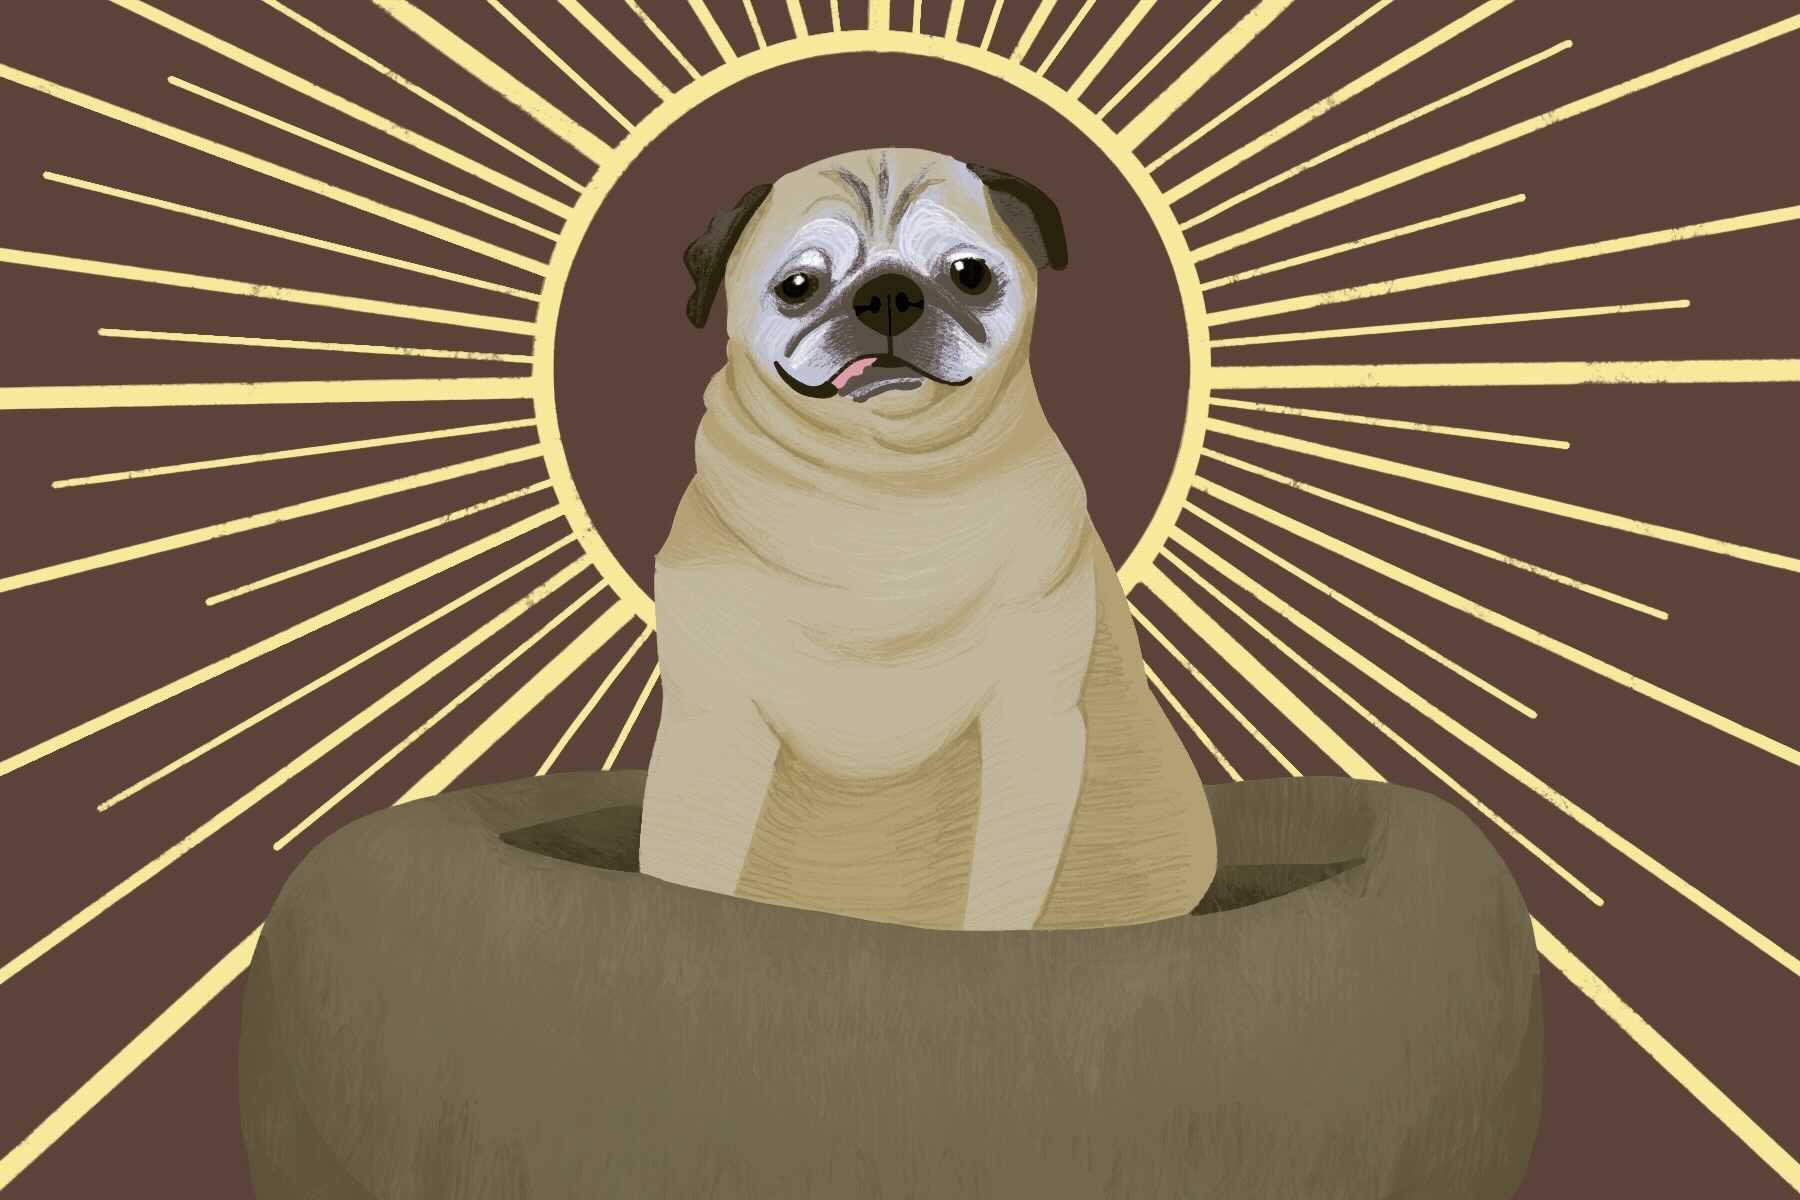 Noodle the Elderly Pug Decides Your Daily Forecast on TikTok